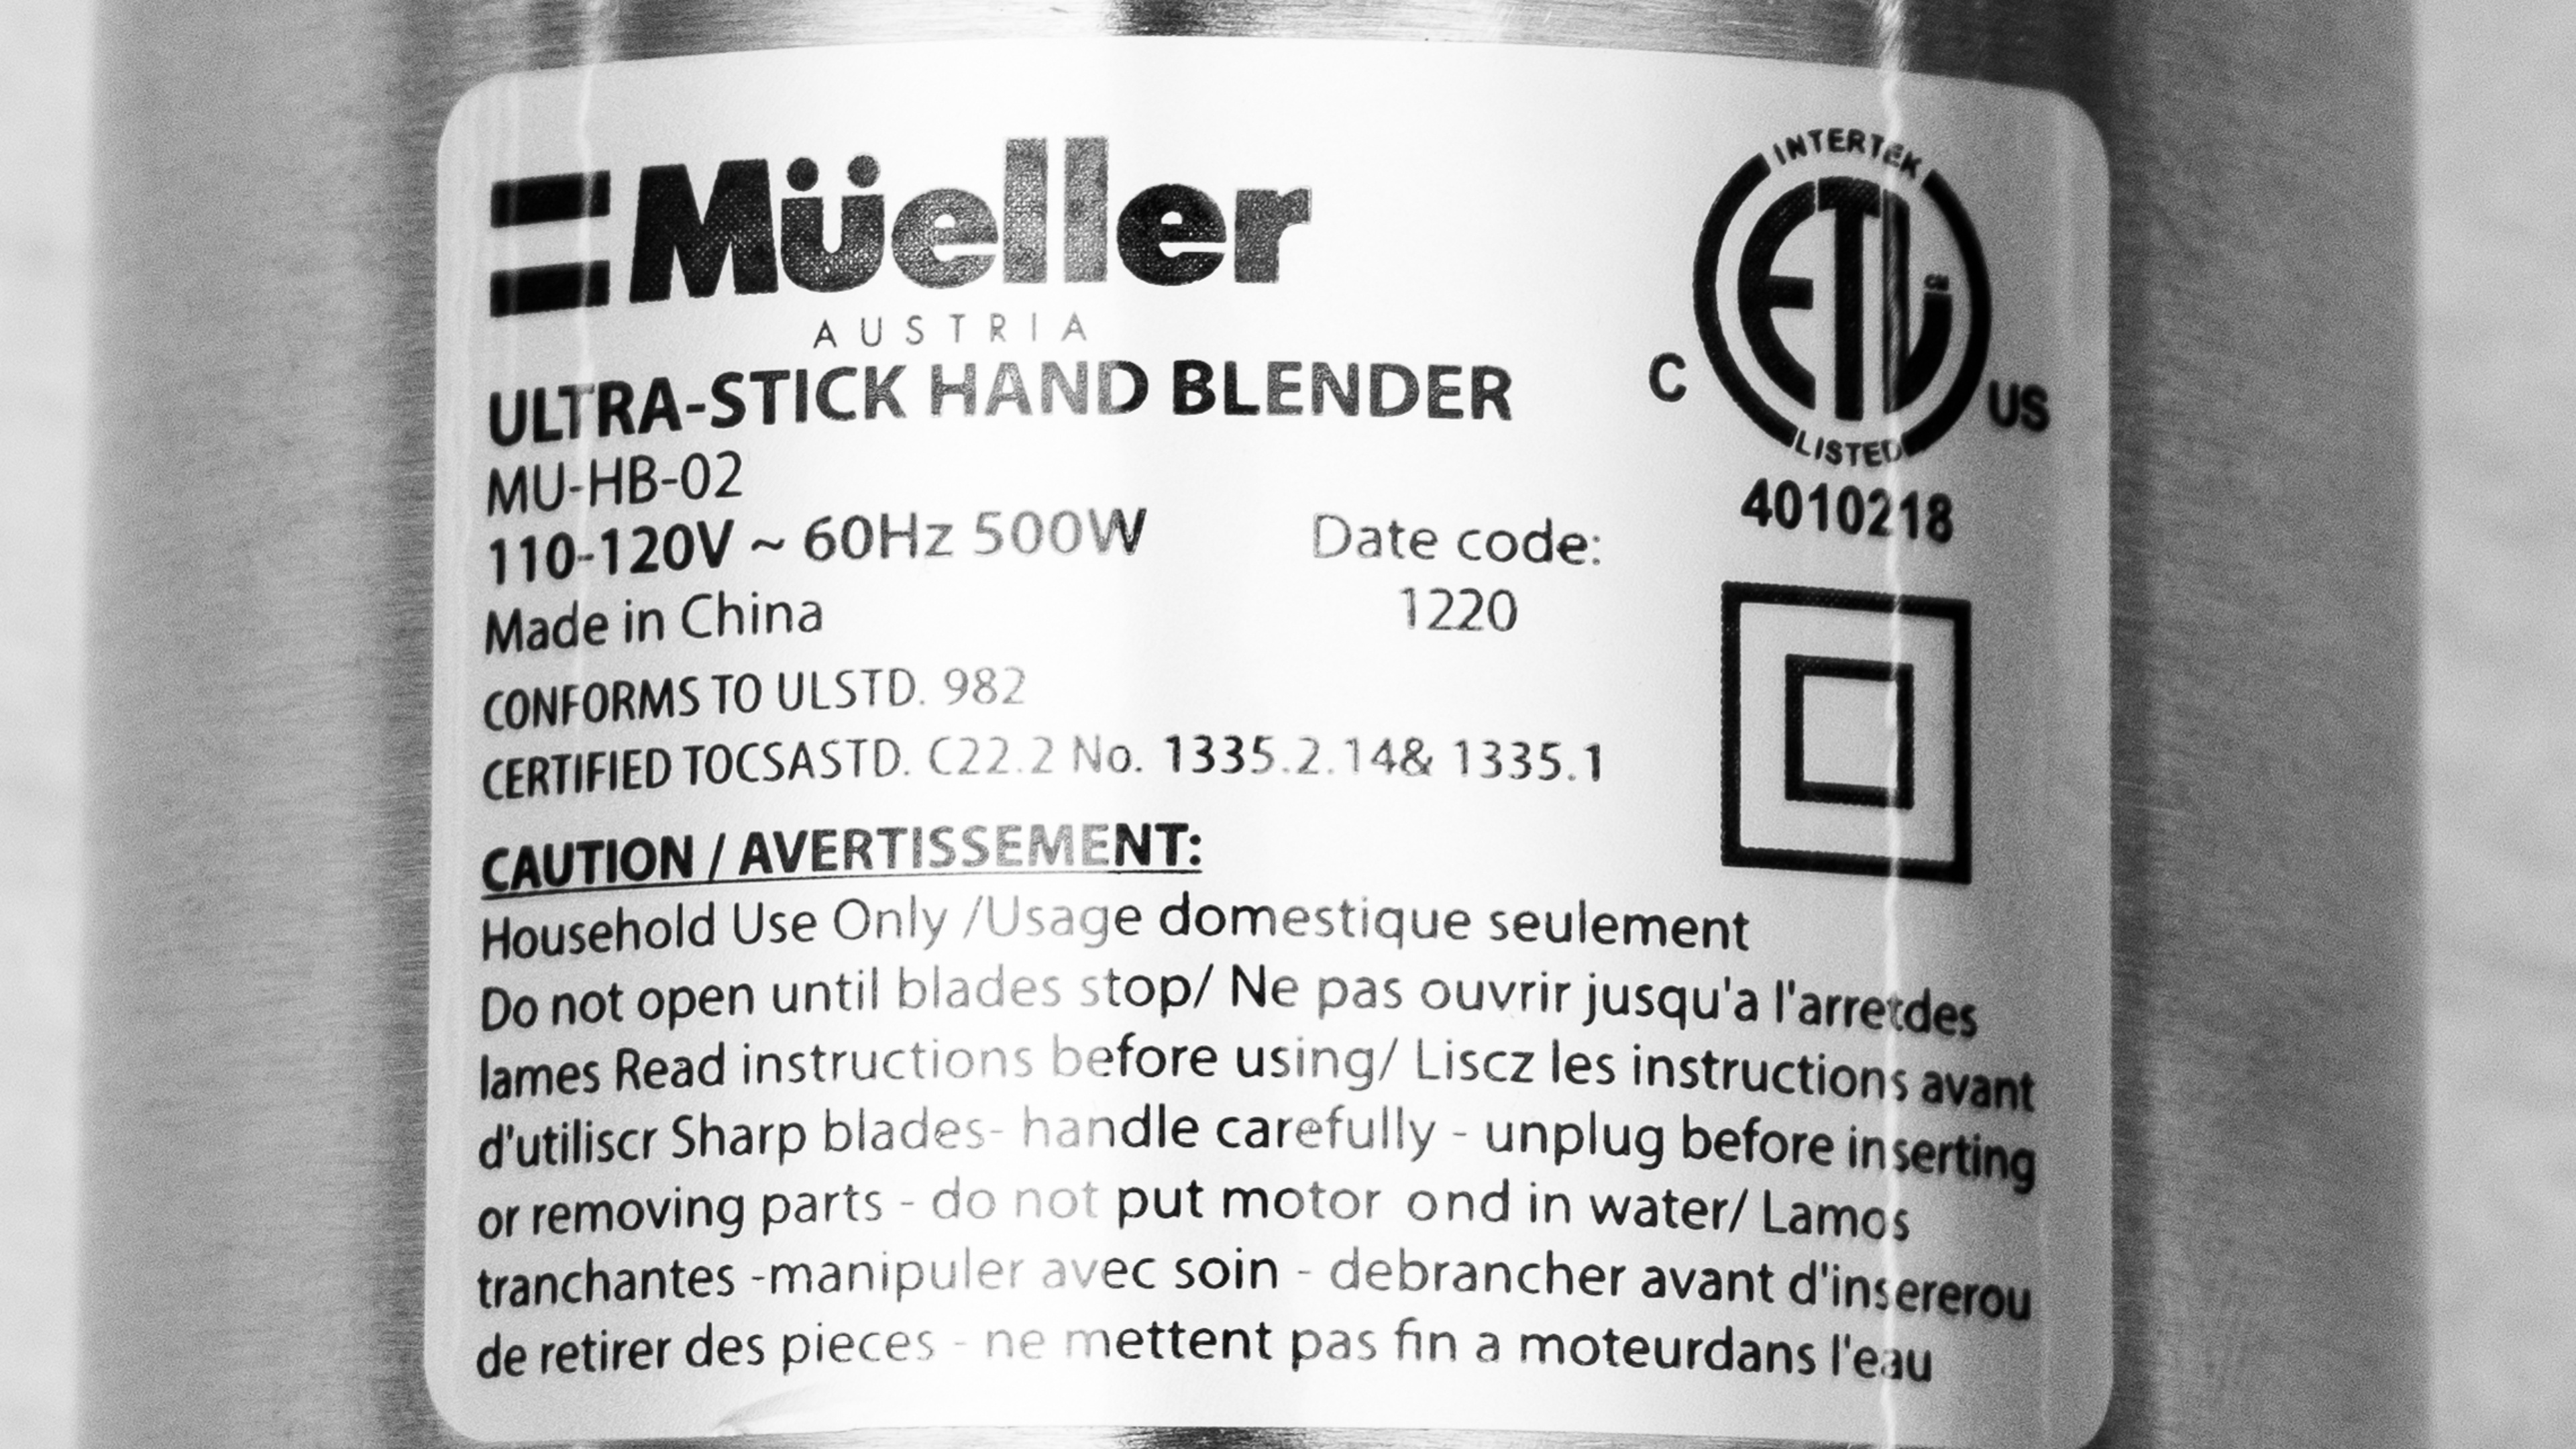 https://www.rtings.com/assets/products/Wh4ymMzf/mueller-ultra-stick-hand-blender/label-large.jpg